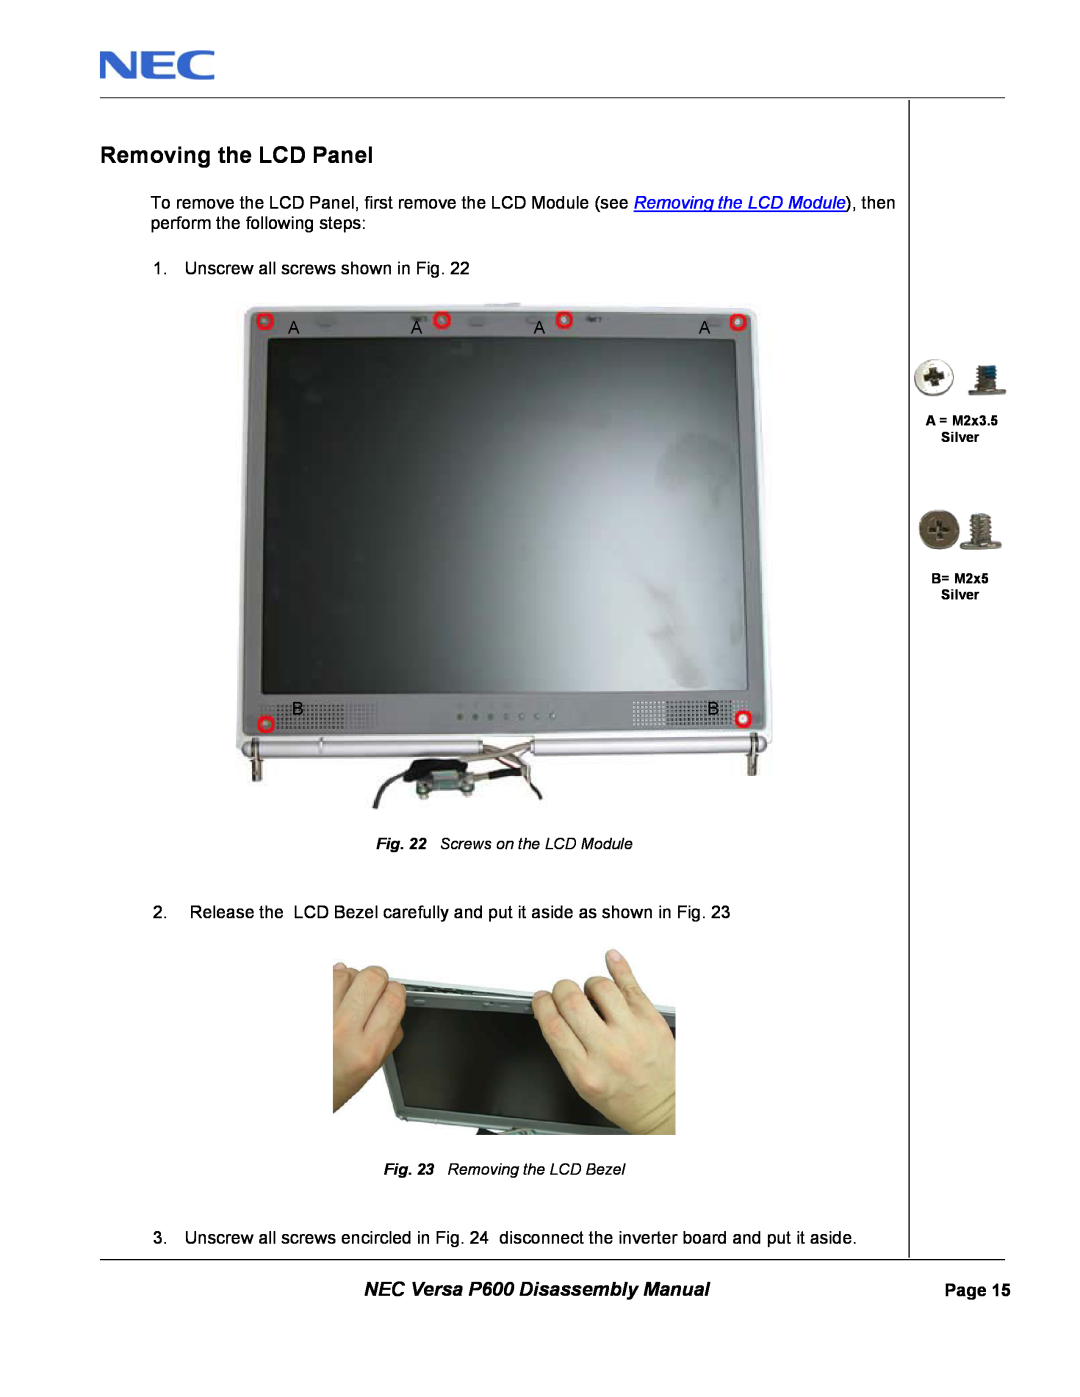 NEC manual Removing the LCD Panel, NEC Versa P600 Disassembly Manual 